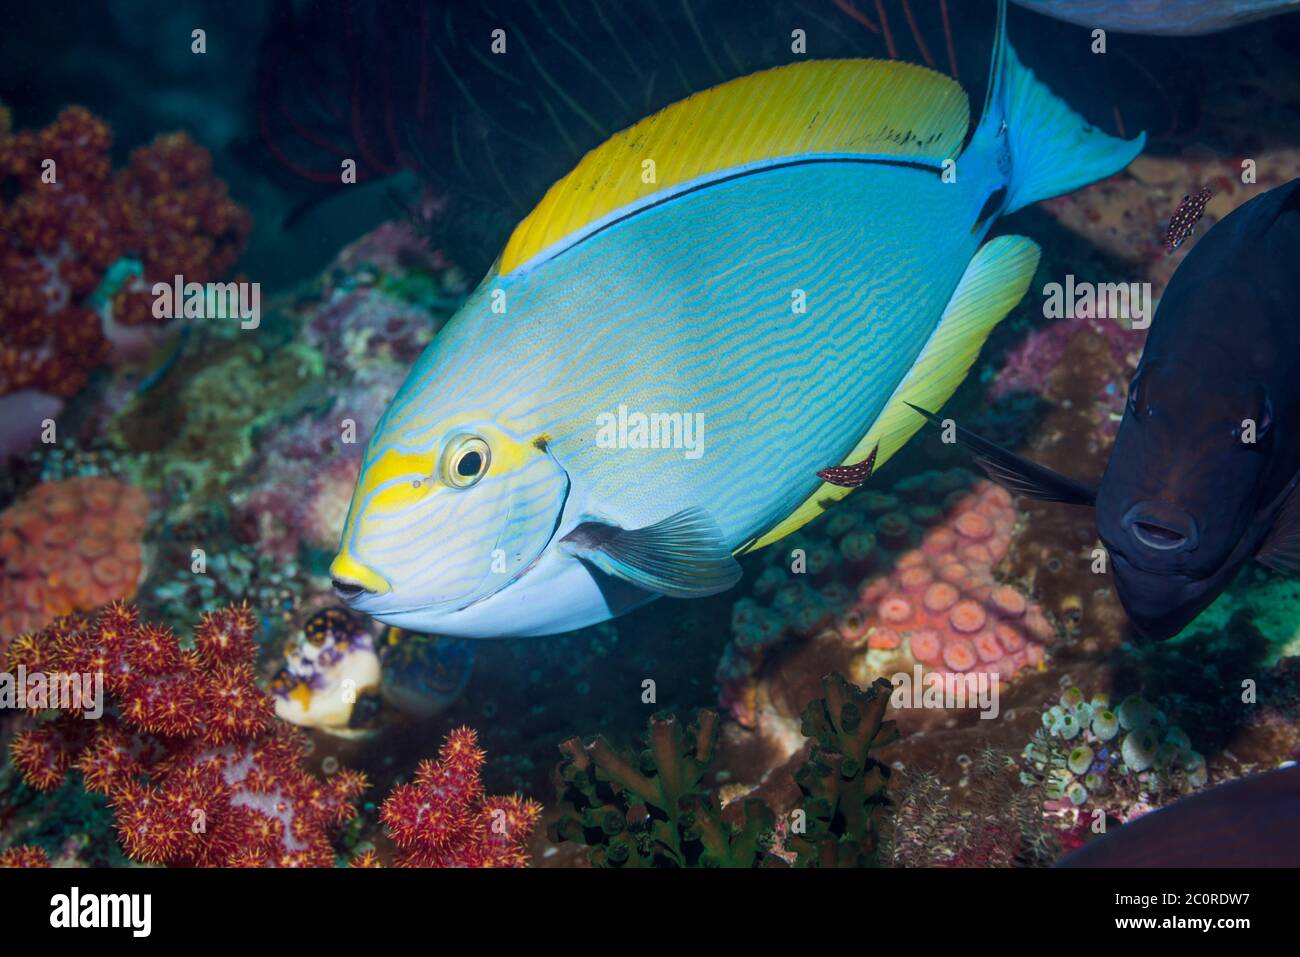 Elongate Surgeonfish [Acanthurus mata] with a Juvenile Diana's Hogfish [Bodianus diana] cleaning.  The fish next to it is also an Elongate Surgeonfish Stock Photo